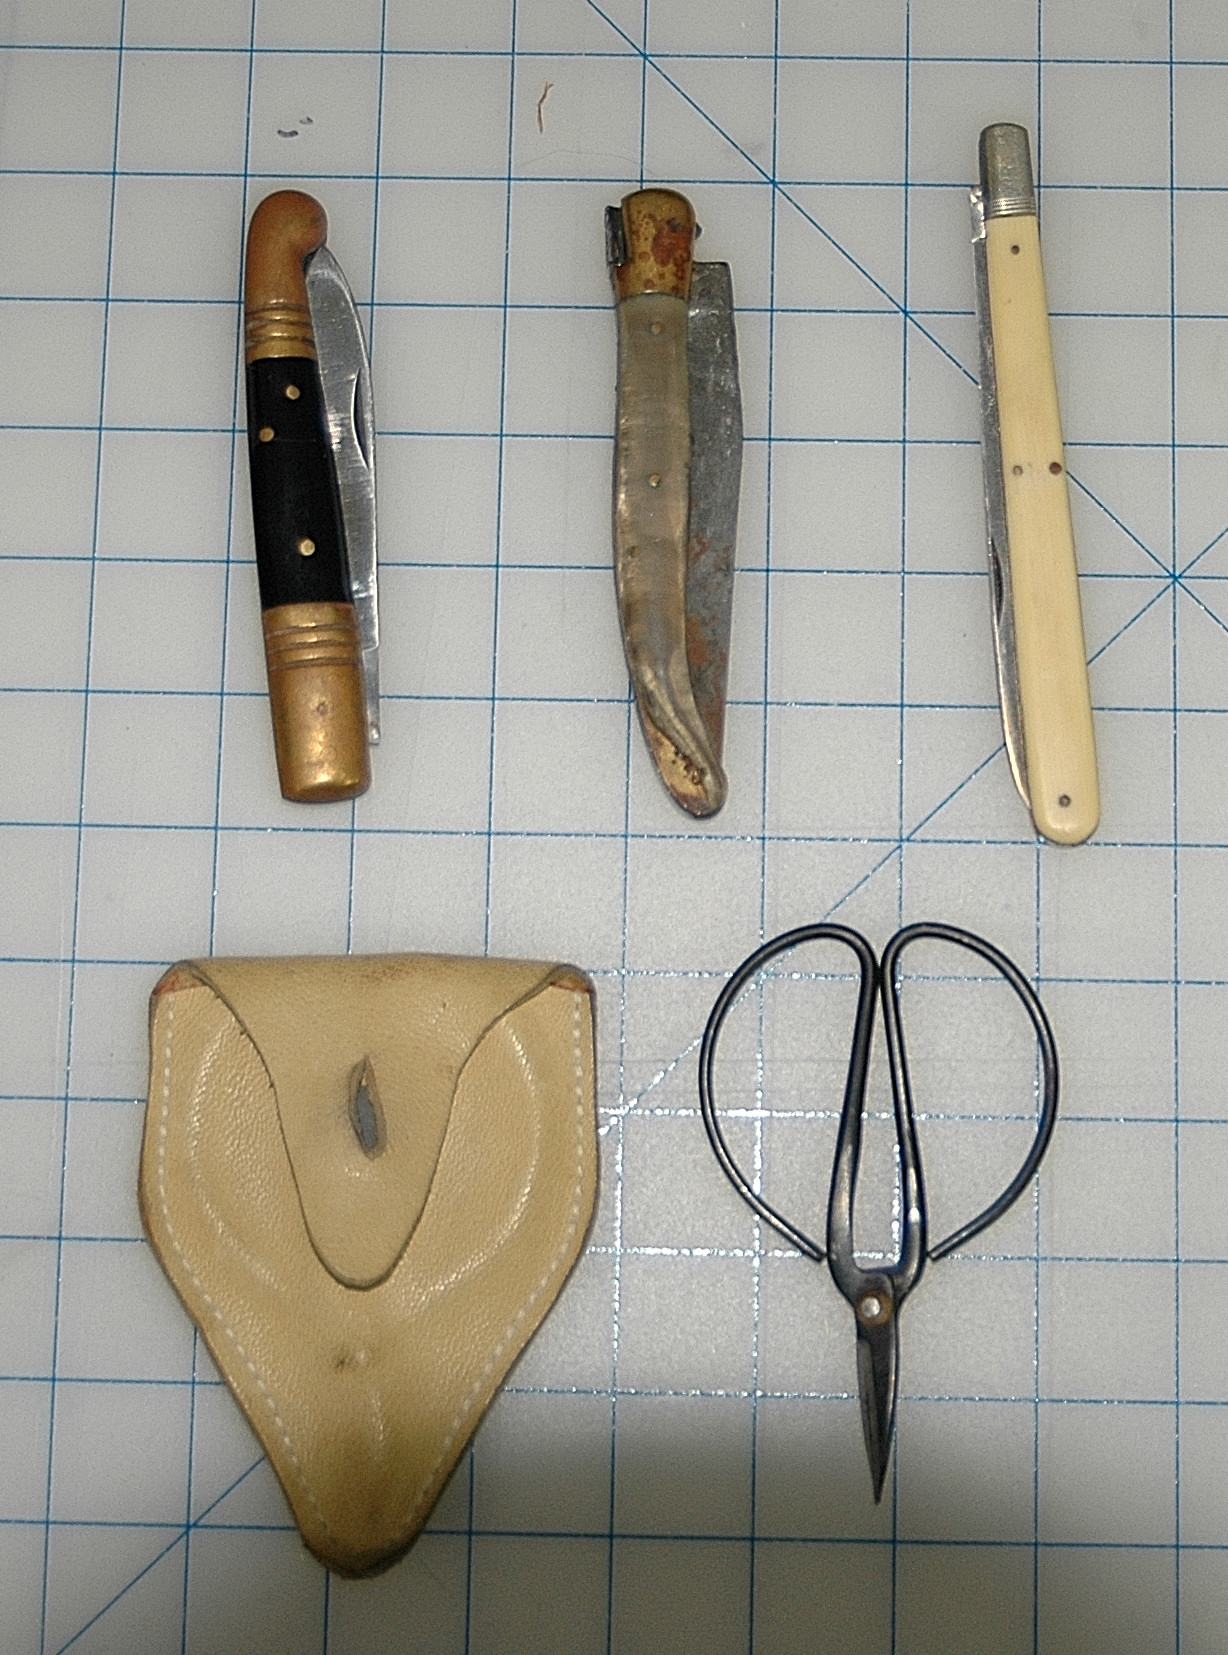 Sewing & Leatherwork Implements